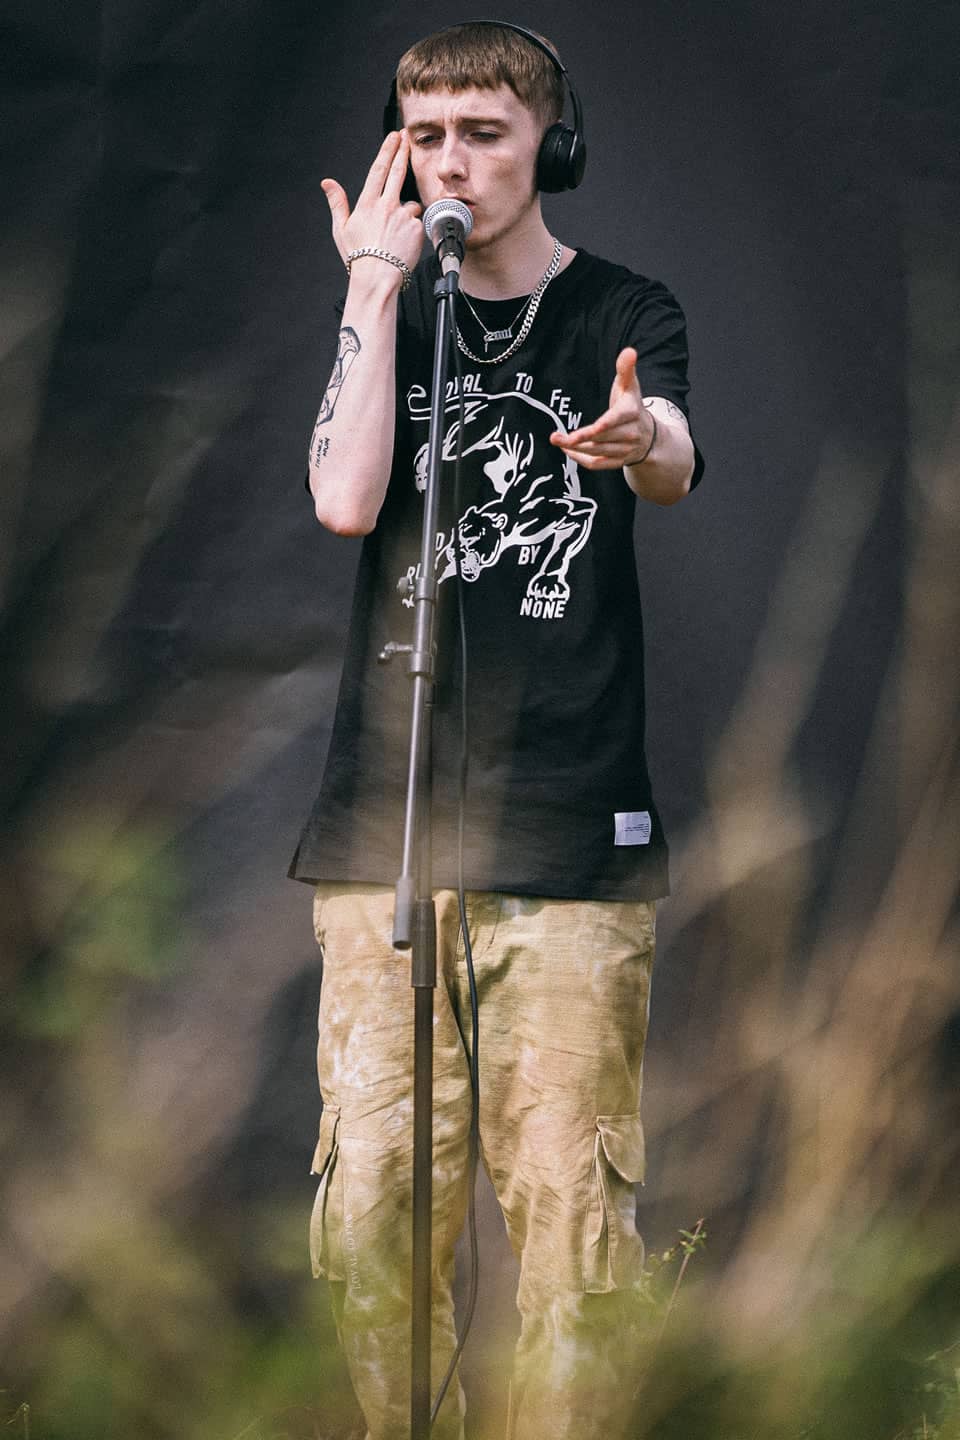 Hen$haw wears King Apparel Earlham Panther t-shirt in black and cargo pants in camo acid wash